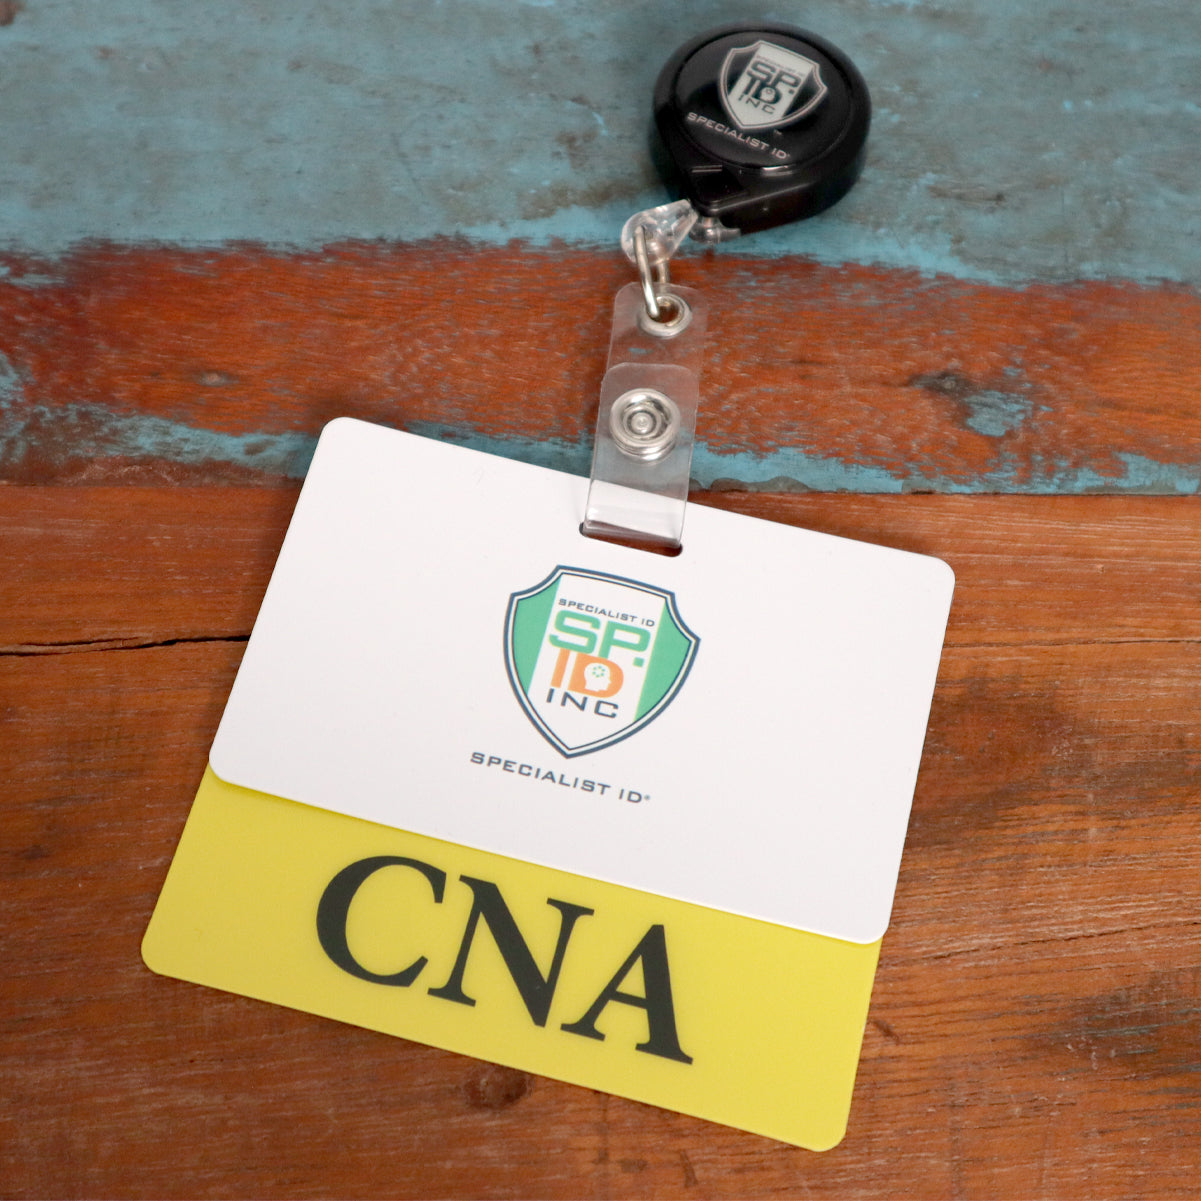 A name badge reel and holder rest on a wooden surface, featuring a "Specialist ID Inc." card and a yellow "CNA" card. The setup is complemented by a Clear CNA Badge Buddy - Horizontal ID Badge Backer for Nursing Assistant - Double Sided Print, ensuring the CNA Badge Buddy stays visible and secure.